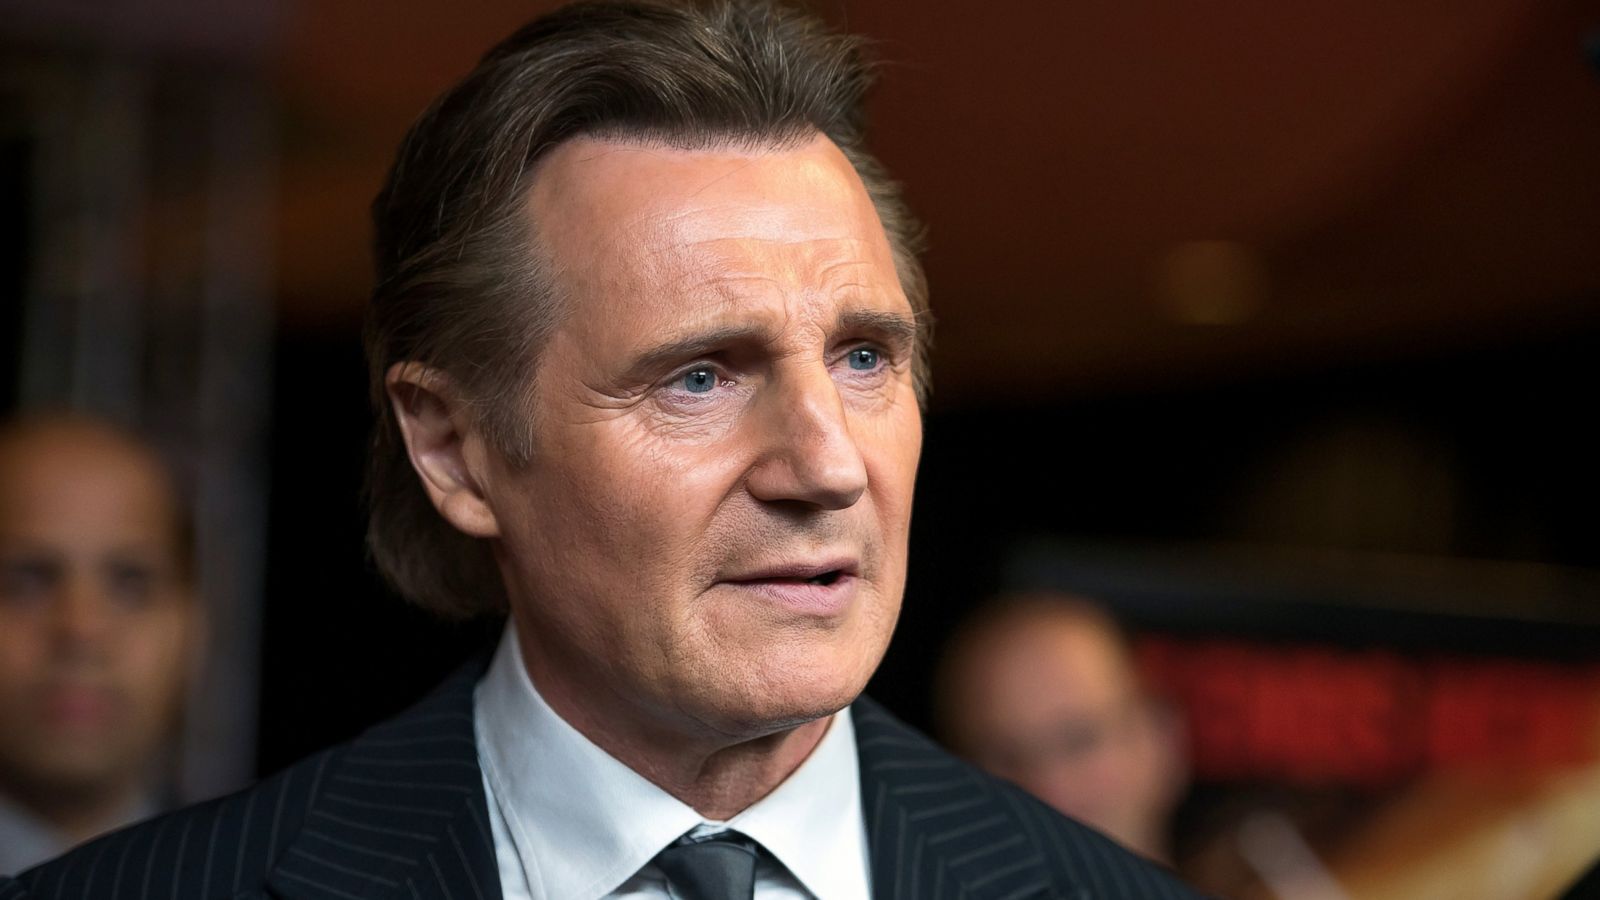 Liam Neeson Says He's Almost Done With Action Movies - ABC News